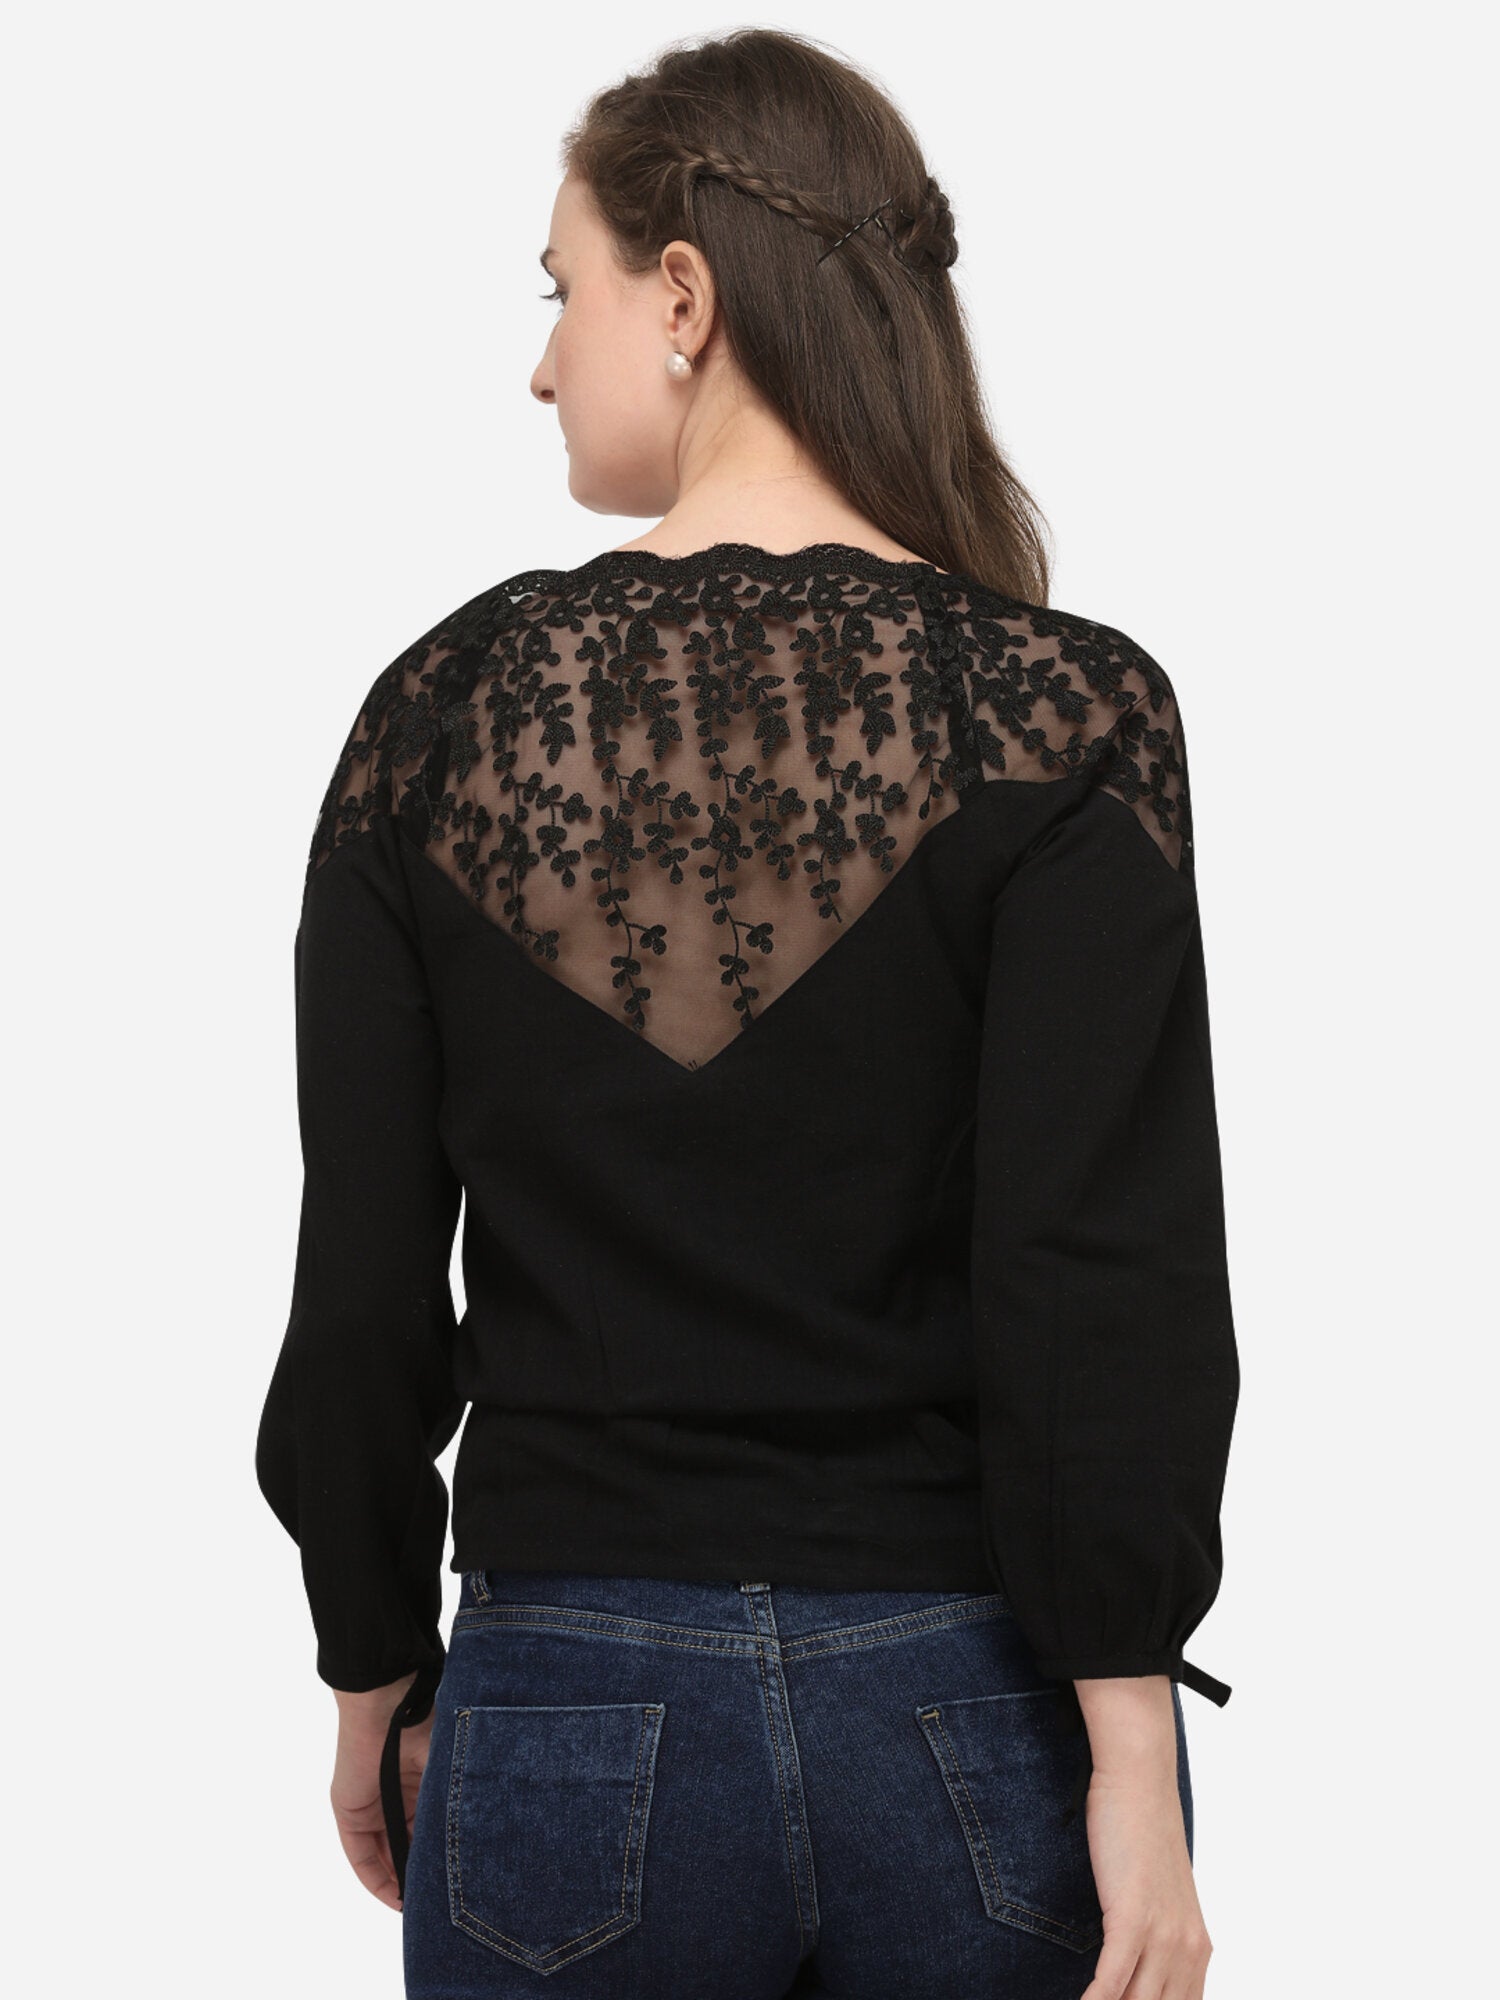 Women's Black Embroidered Full Sleeve Only Top - MESMORA FASHION